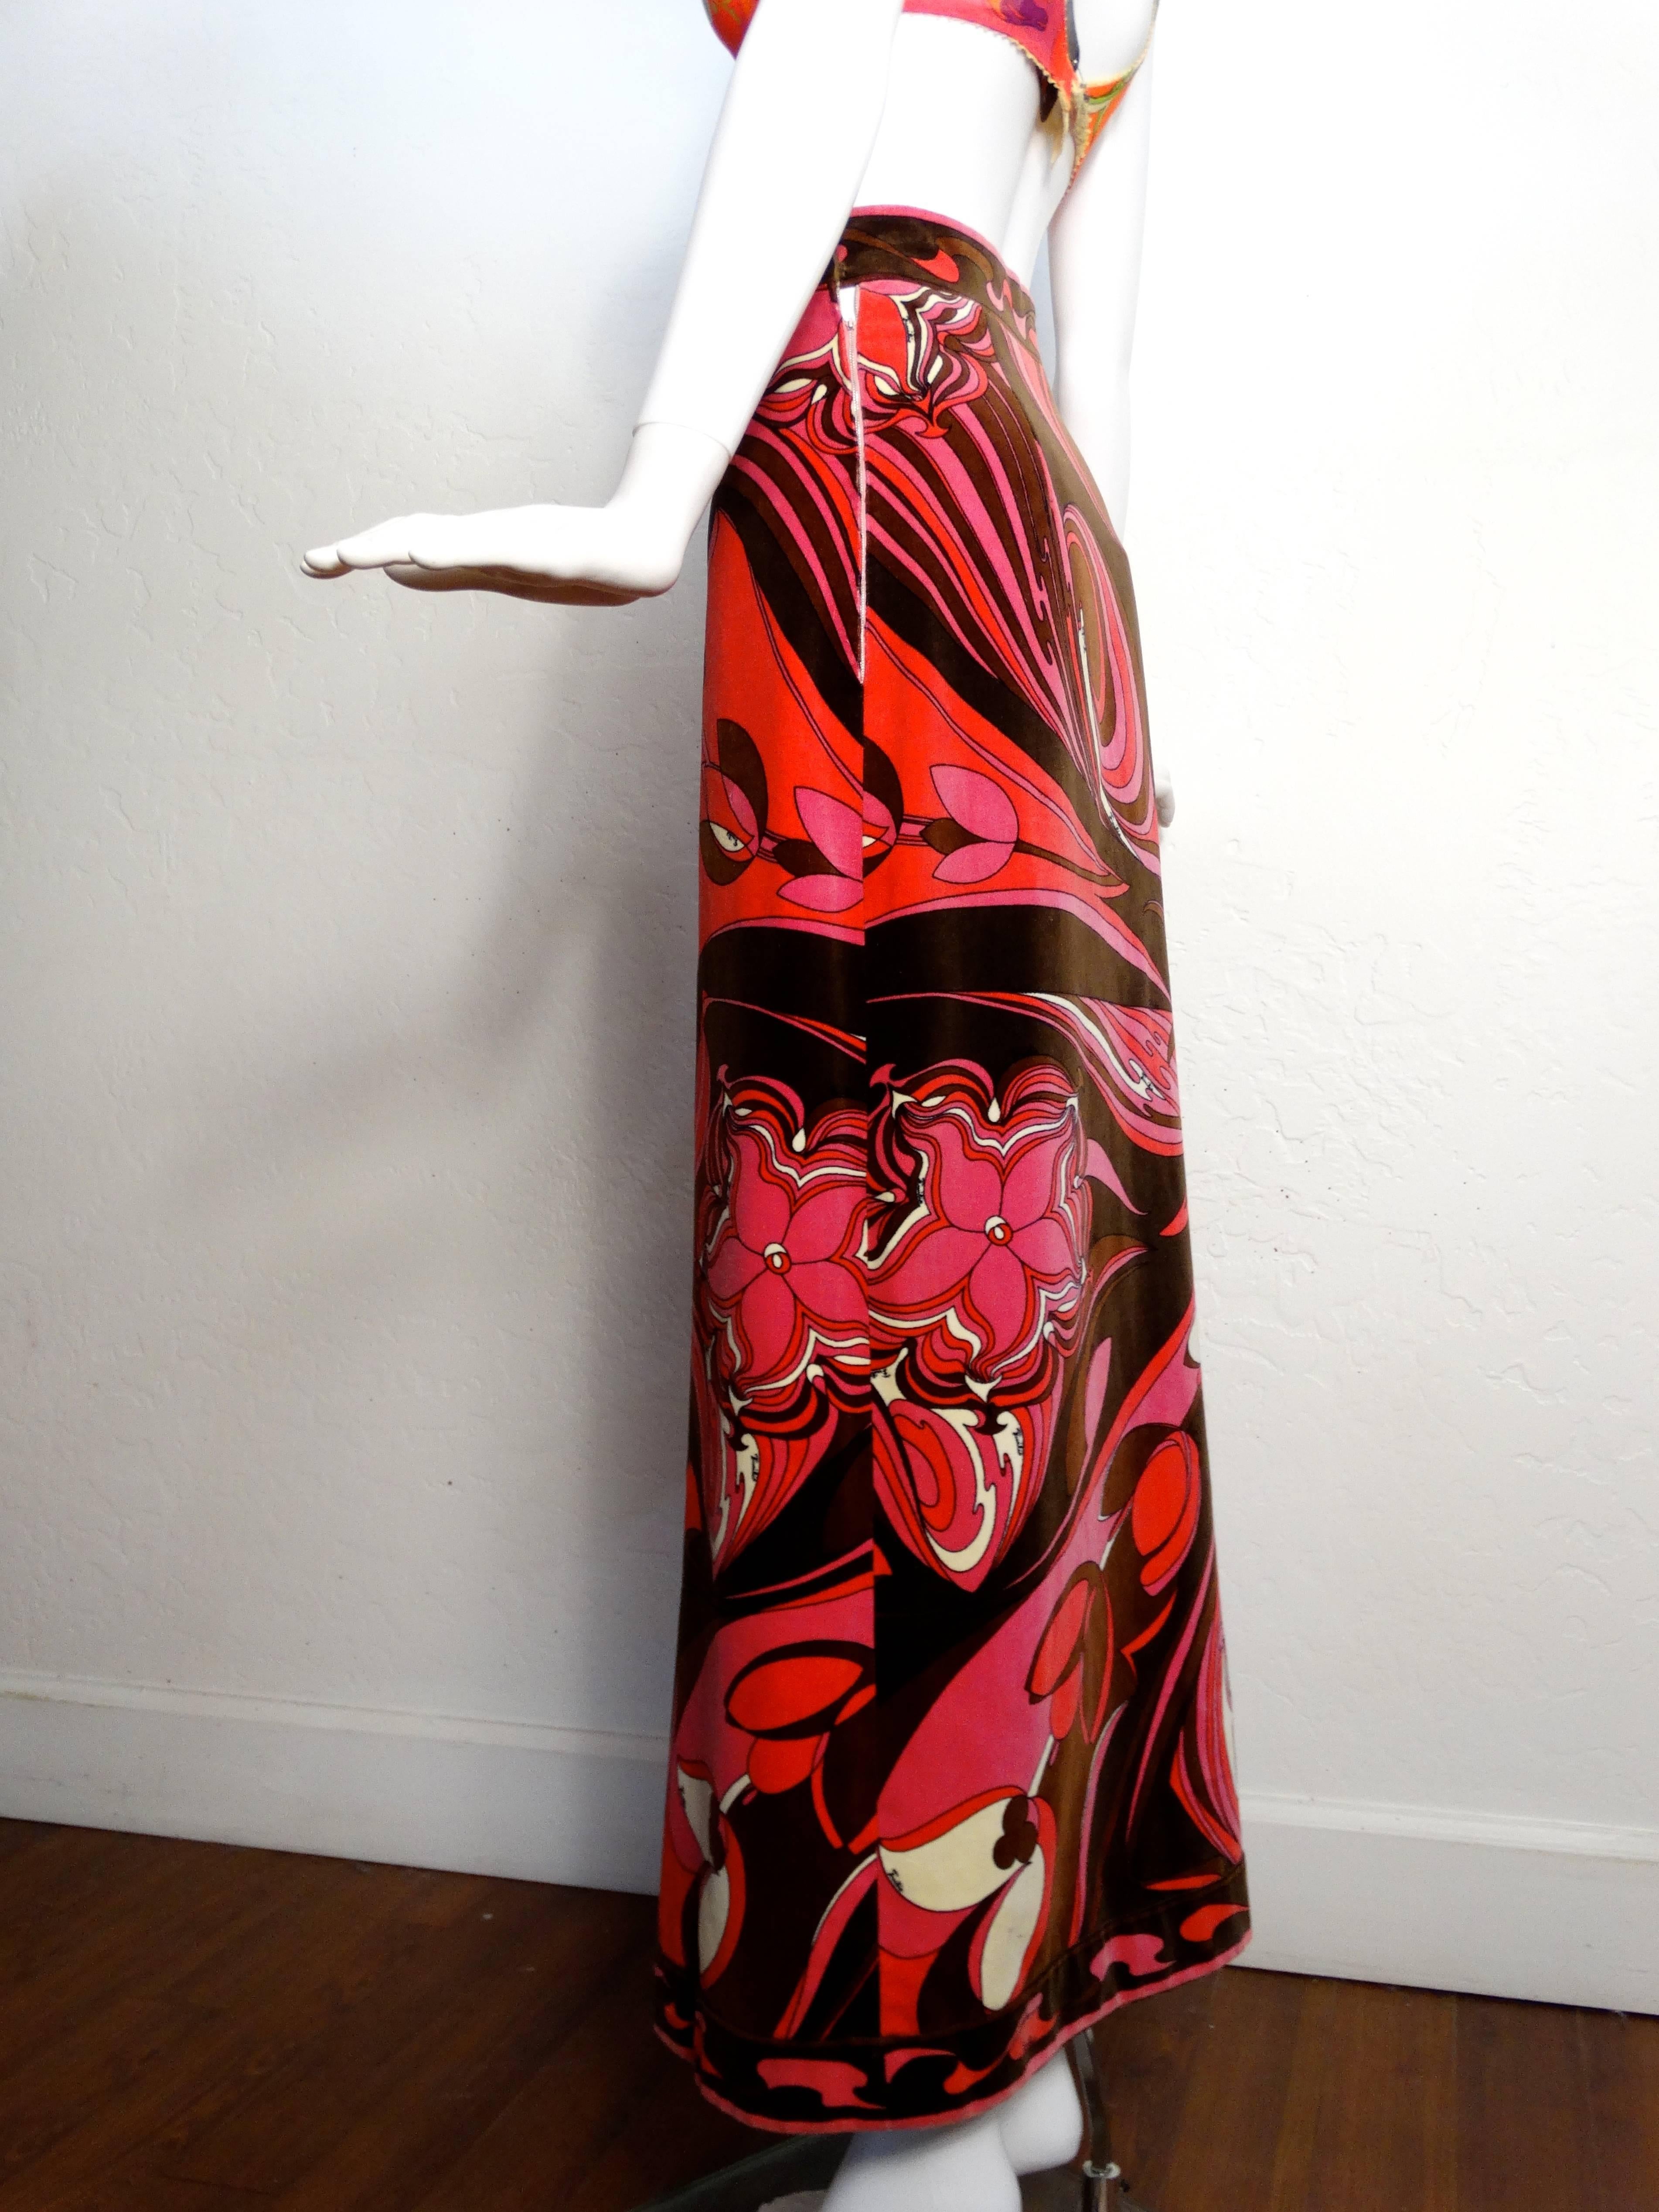 Beautiful 1960's a-line flared velvet maxi skirt by Emilio Pucci for Saks Fifth Avenue. The kaleidoscope graphic print has panels of vibrantly colored abstract prints and florals in pinks, browns, white and red. Side zip entry. Made in Italy.